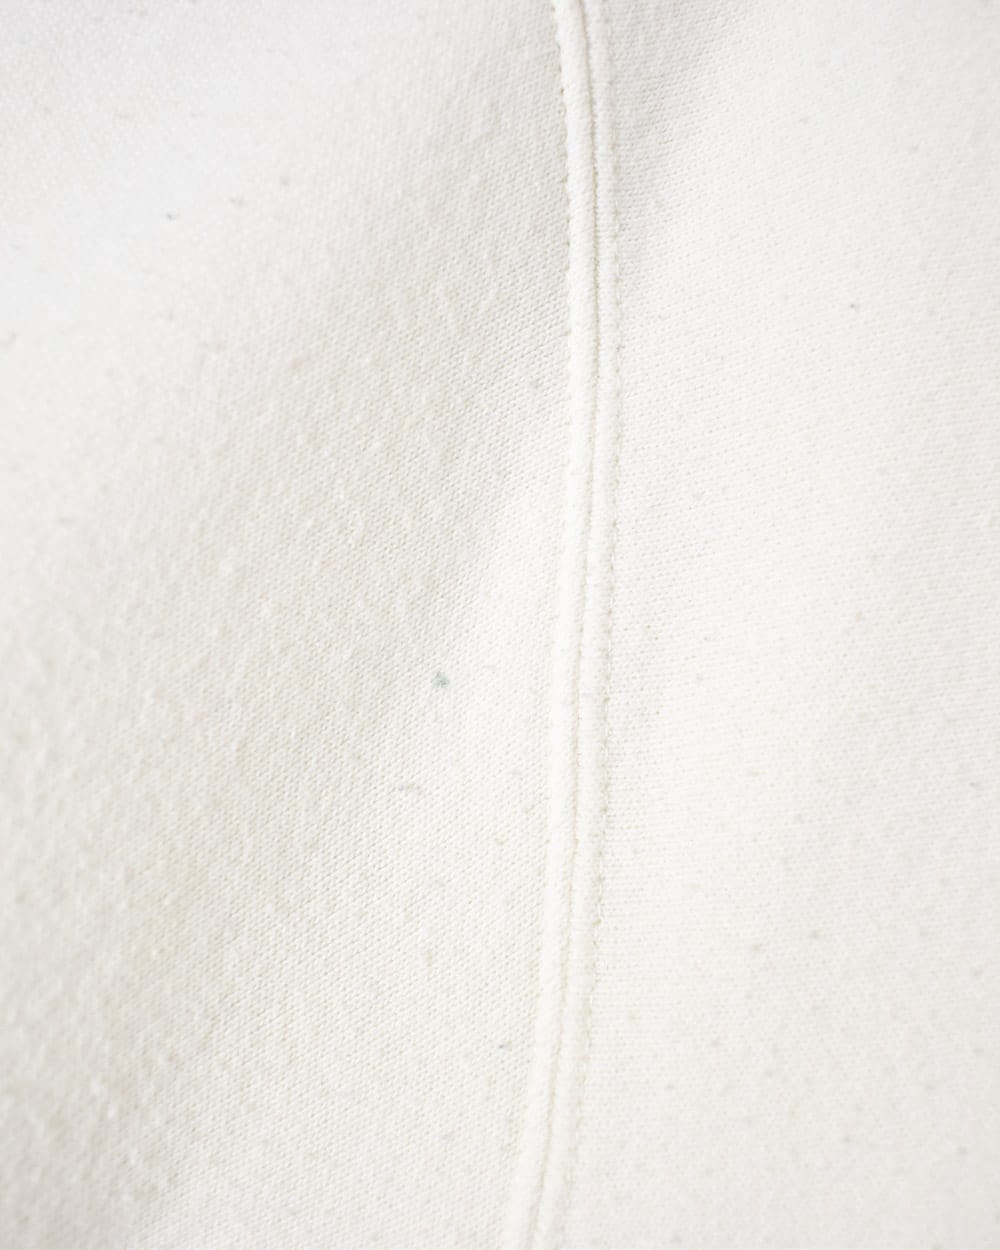 Neutral Champion Reverse Weave Hoodie - Small